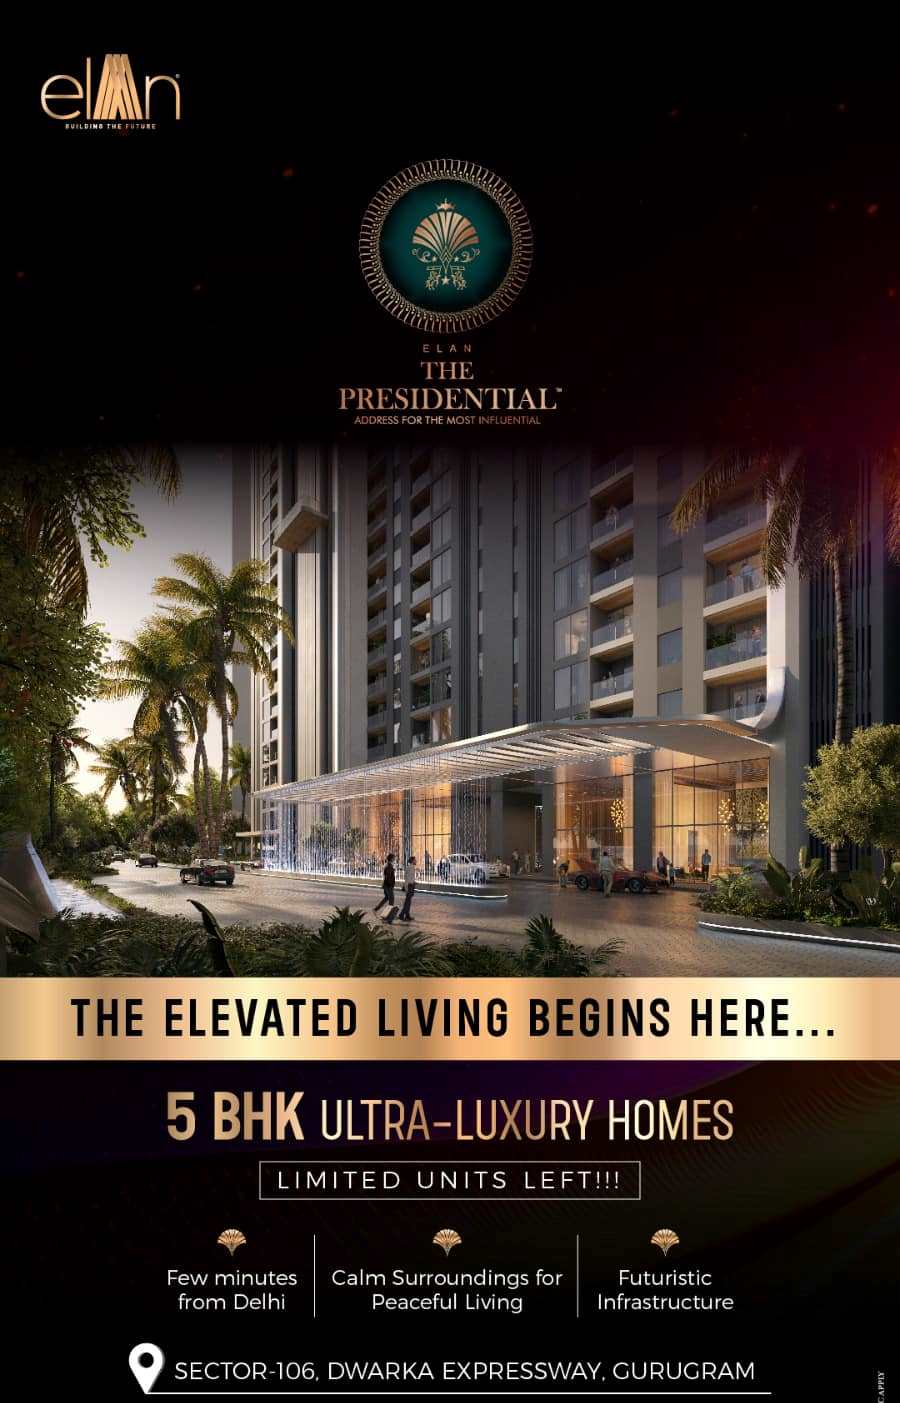 Book 5 BHK ultra luxury homes and limited units left at Elan The Presidential in Dwarka Expressway, Gurgaon